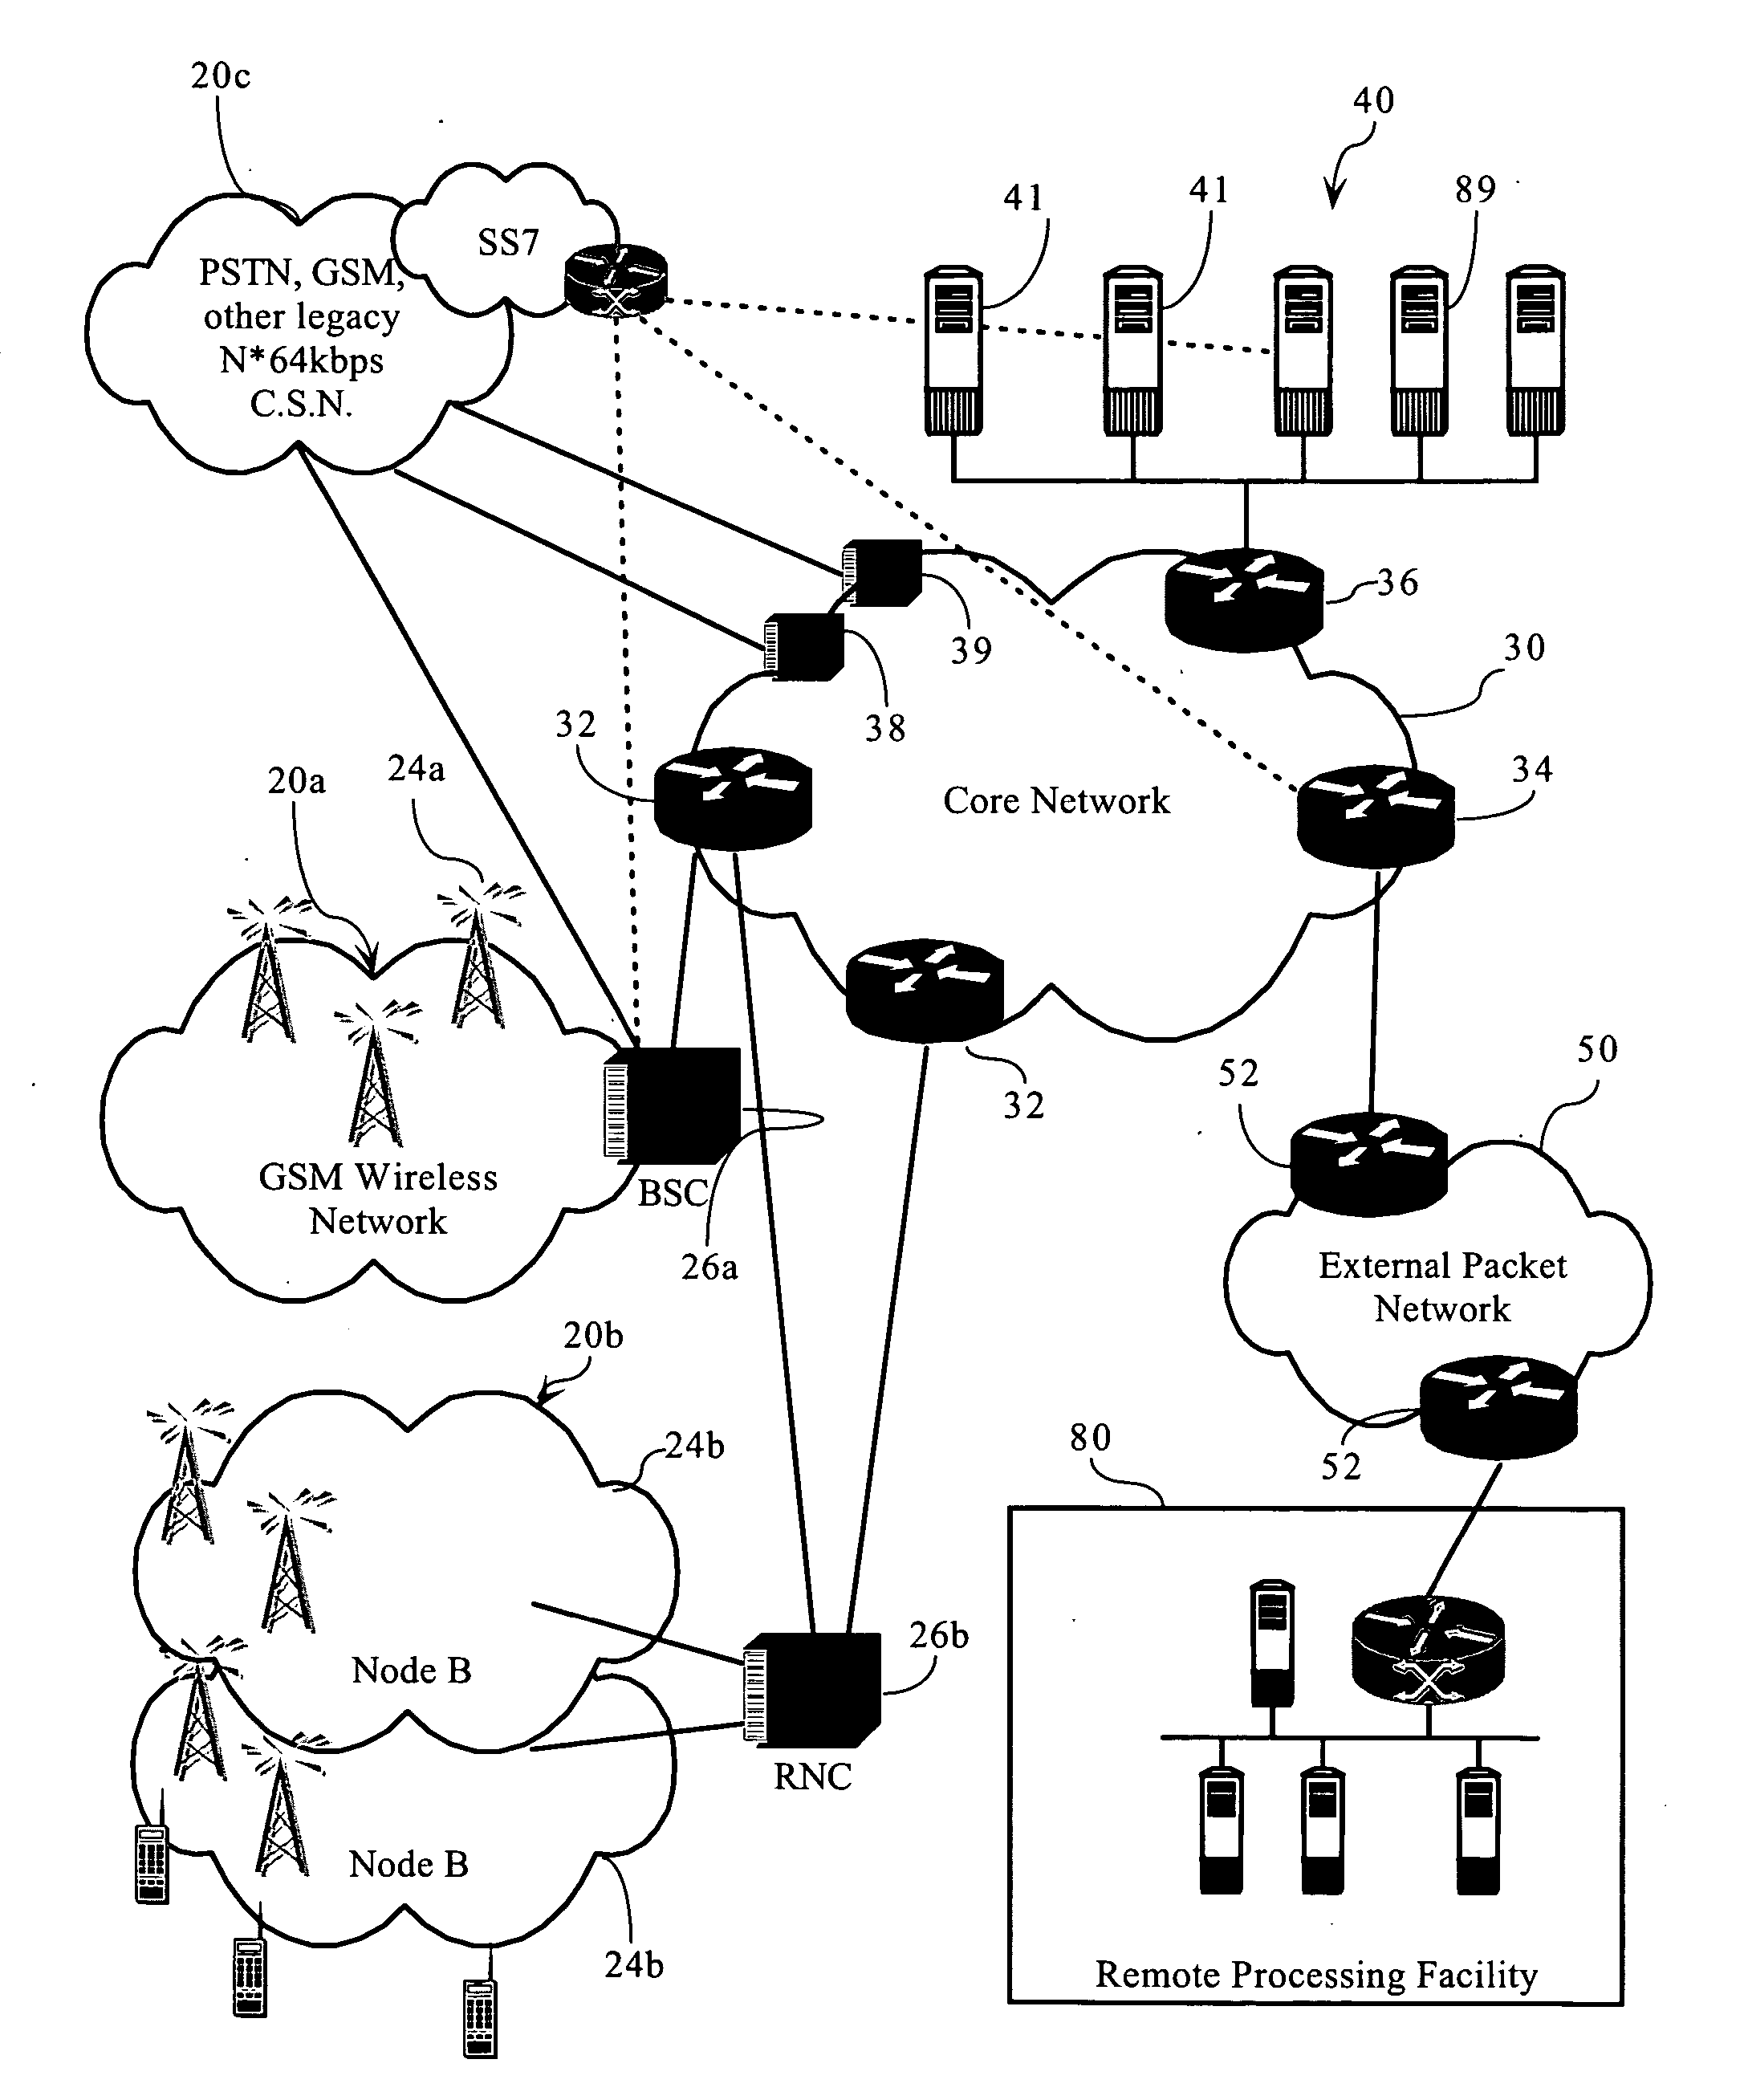 Dynamically distributed, portal-based application services network topology for cellular systems